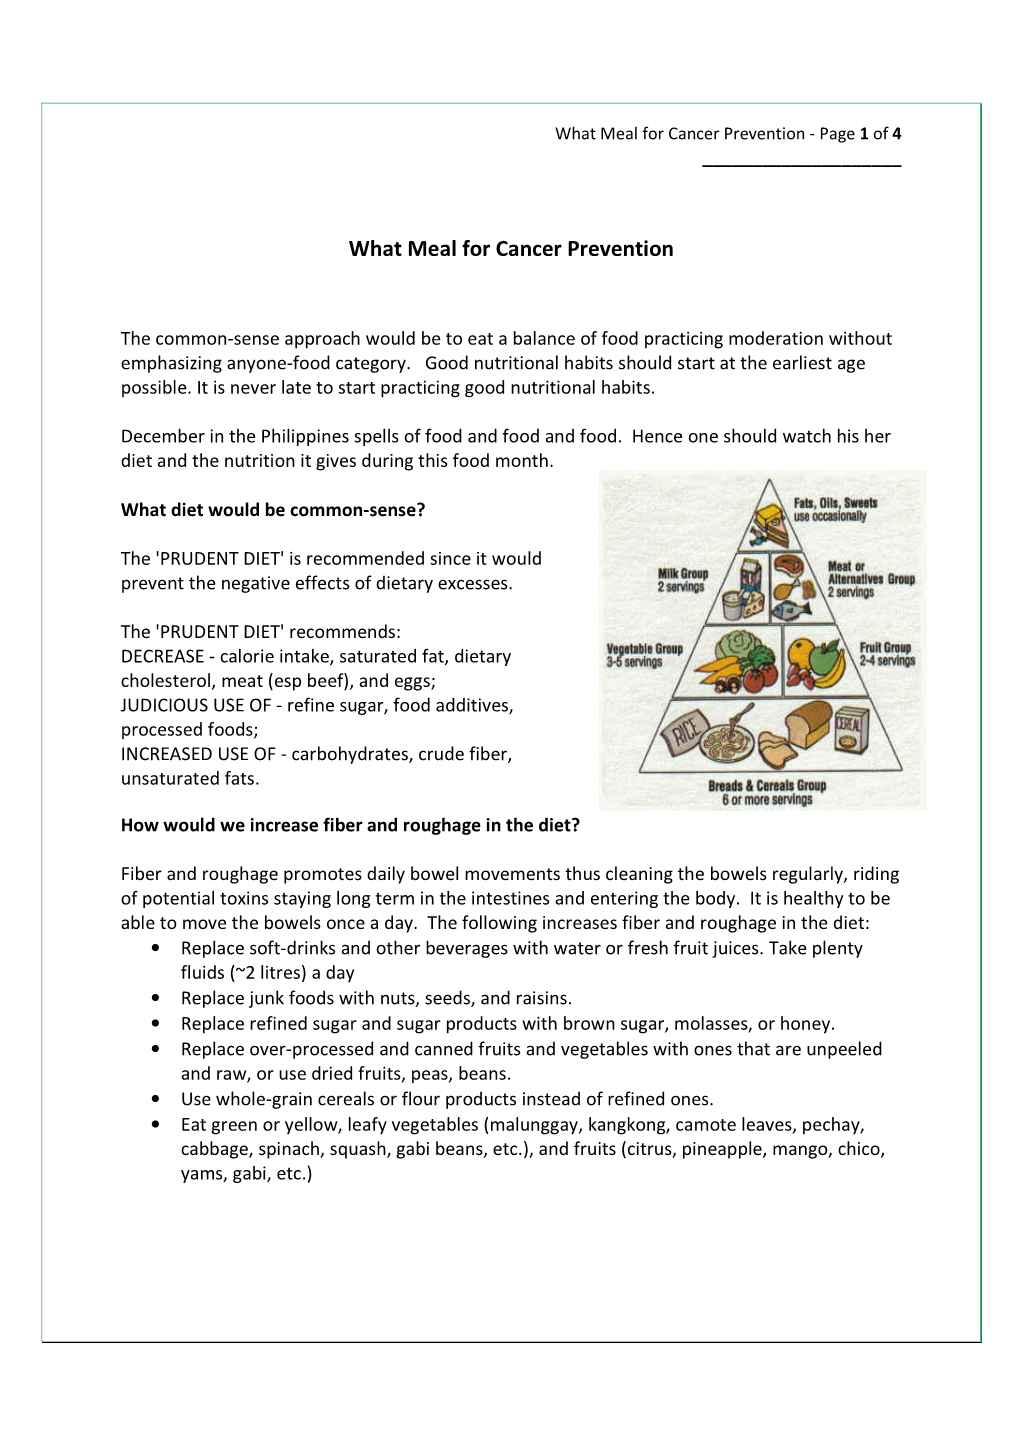 What Meal for Cancer Prevention - Page 1 of 4 ______